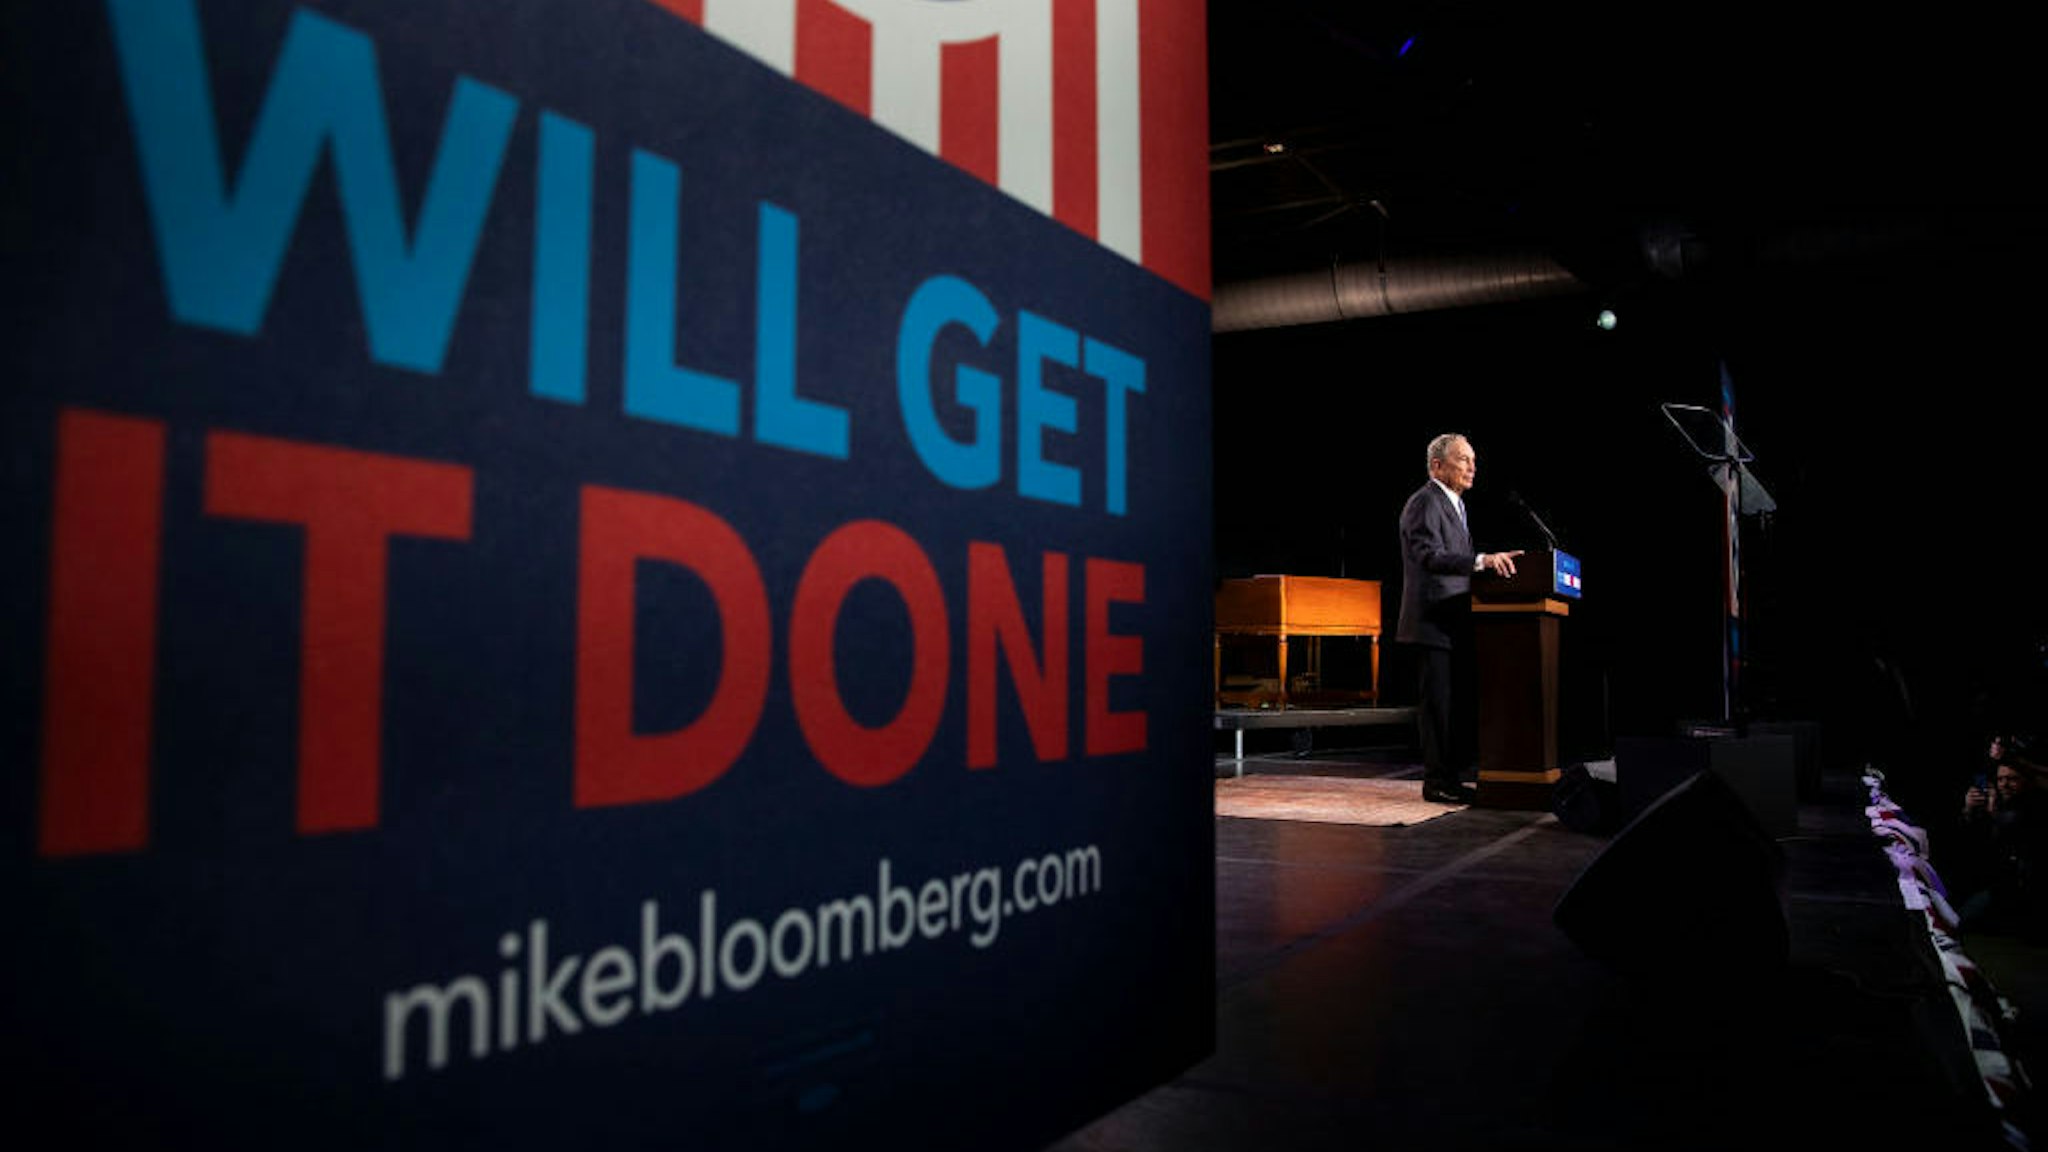 Democratic presidential candidate former New York City Mayor Mike Bloomberg delivers remarks during a campaign rally on February 12, 2020 in Nashville, Tennessee. Bloomberg is holding the rally to mark the beginning of early voting in Tennessee ahead of the Super Tuesday primary on March 3rd. (Photo by Brett Carlsen/Getty Images)